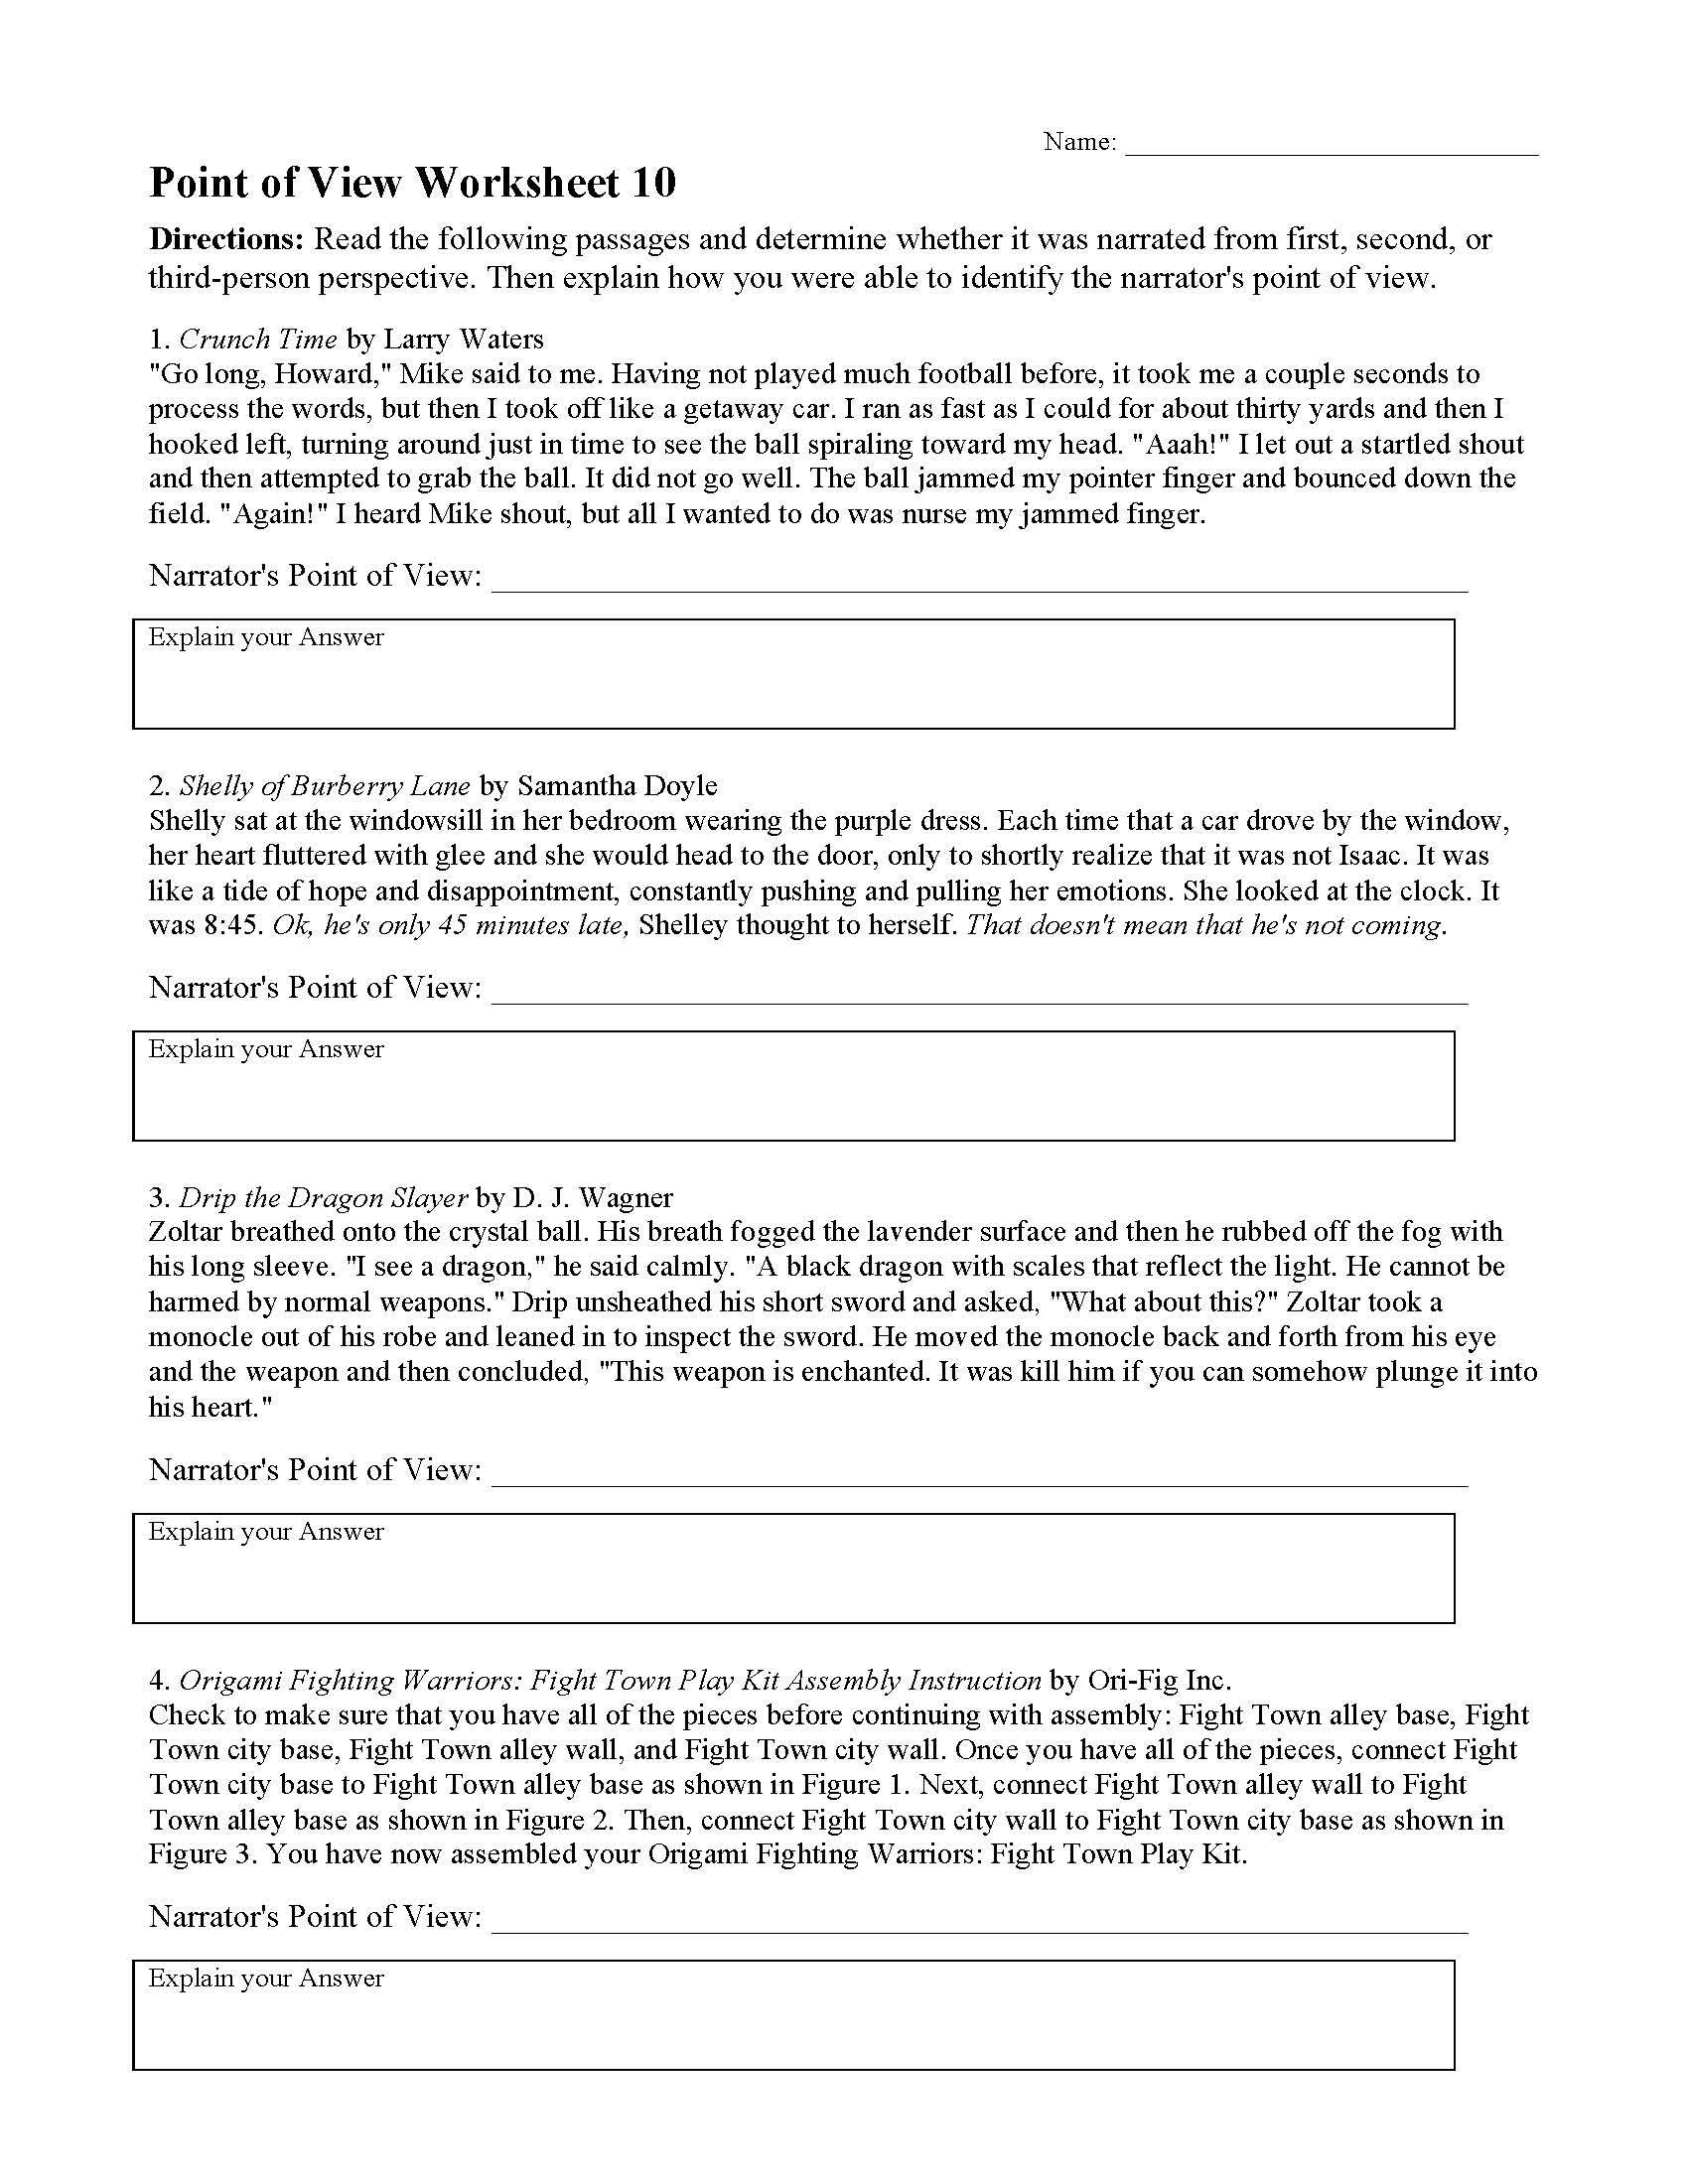 point-of-view-worksheet-1